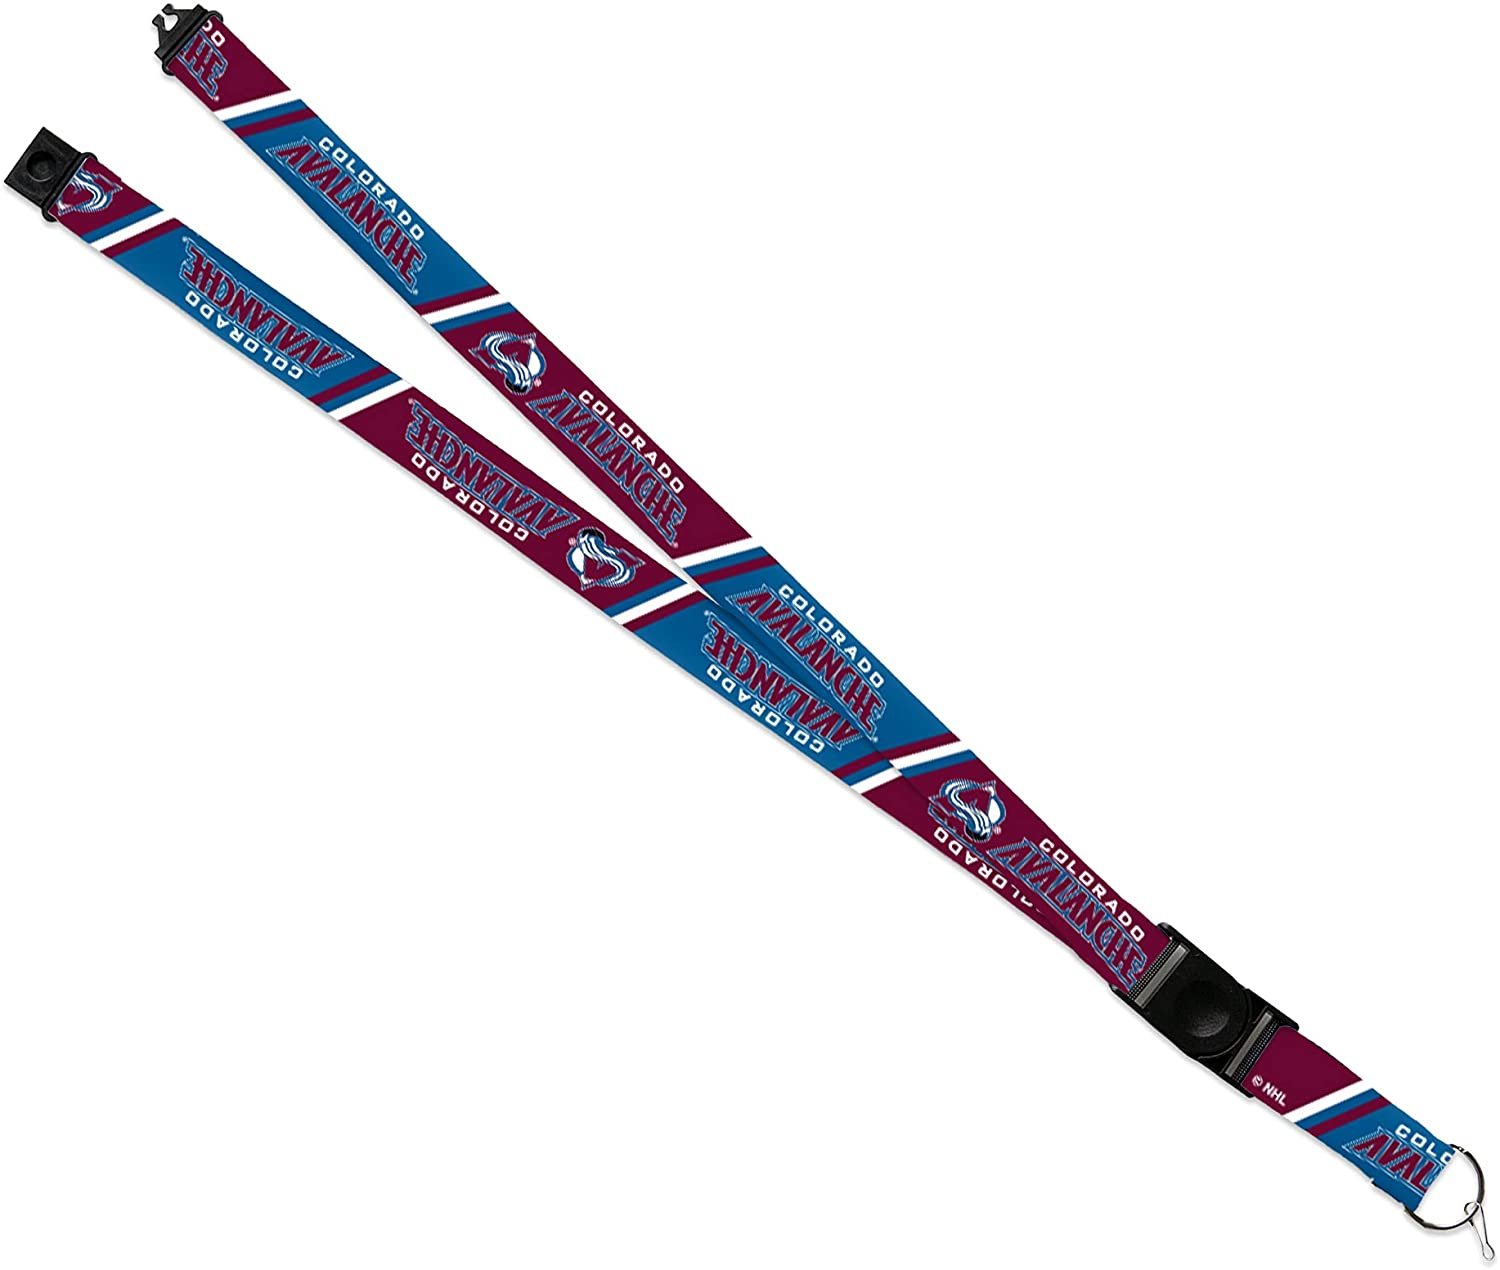 Colorado Avalanche Lanyard Keychain Safety Breakaway Double Sided